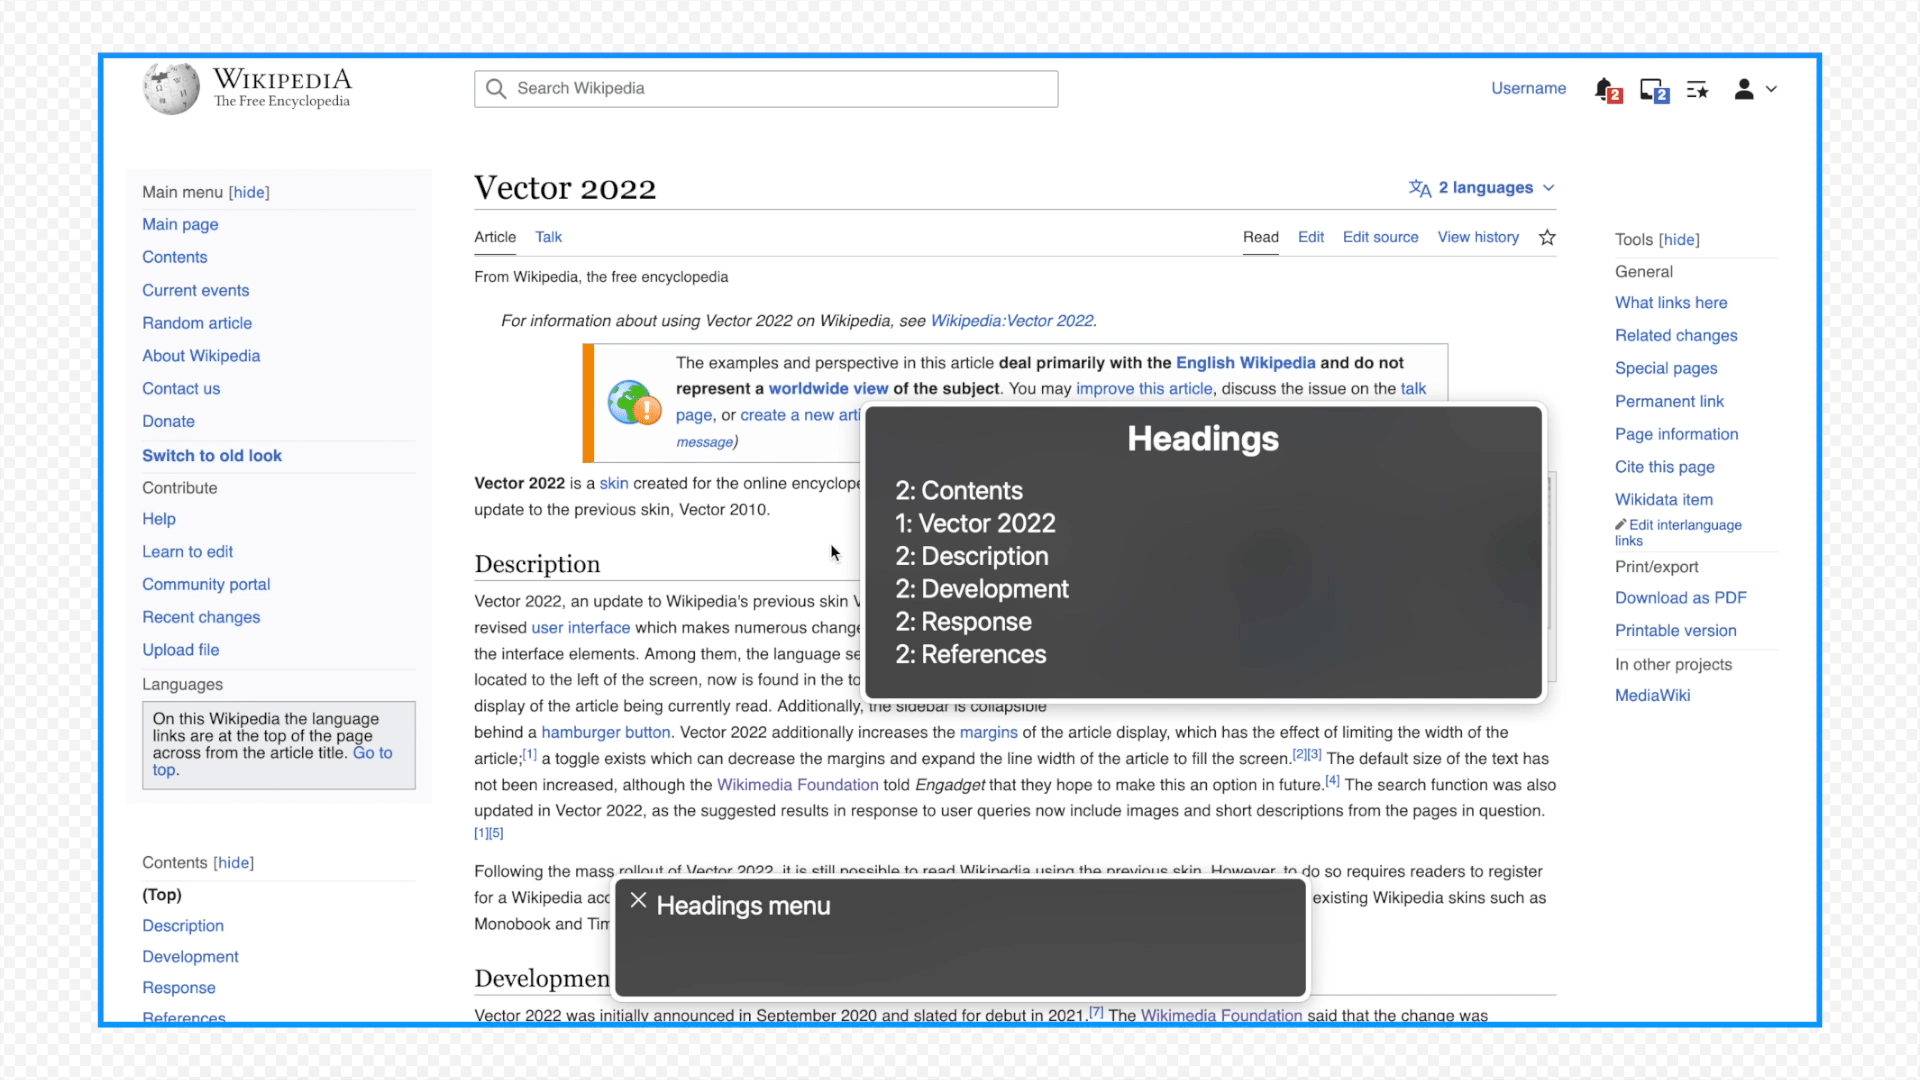 A screen recording of the VoiceOver screenreader being used to navigate the “Vector 2022” Wikipedia page, including navigation by heading and landmarks